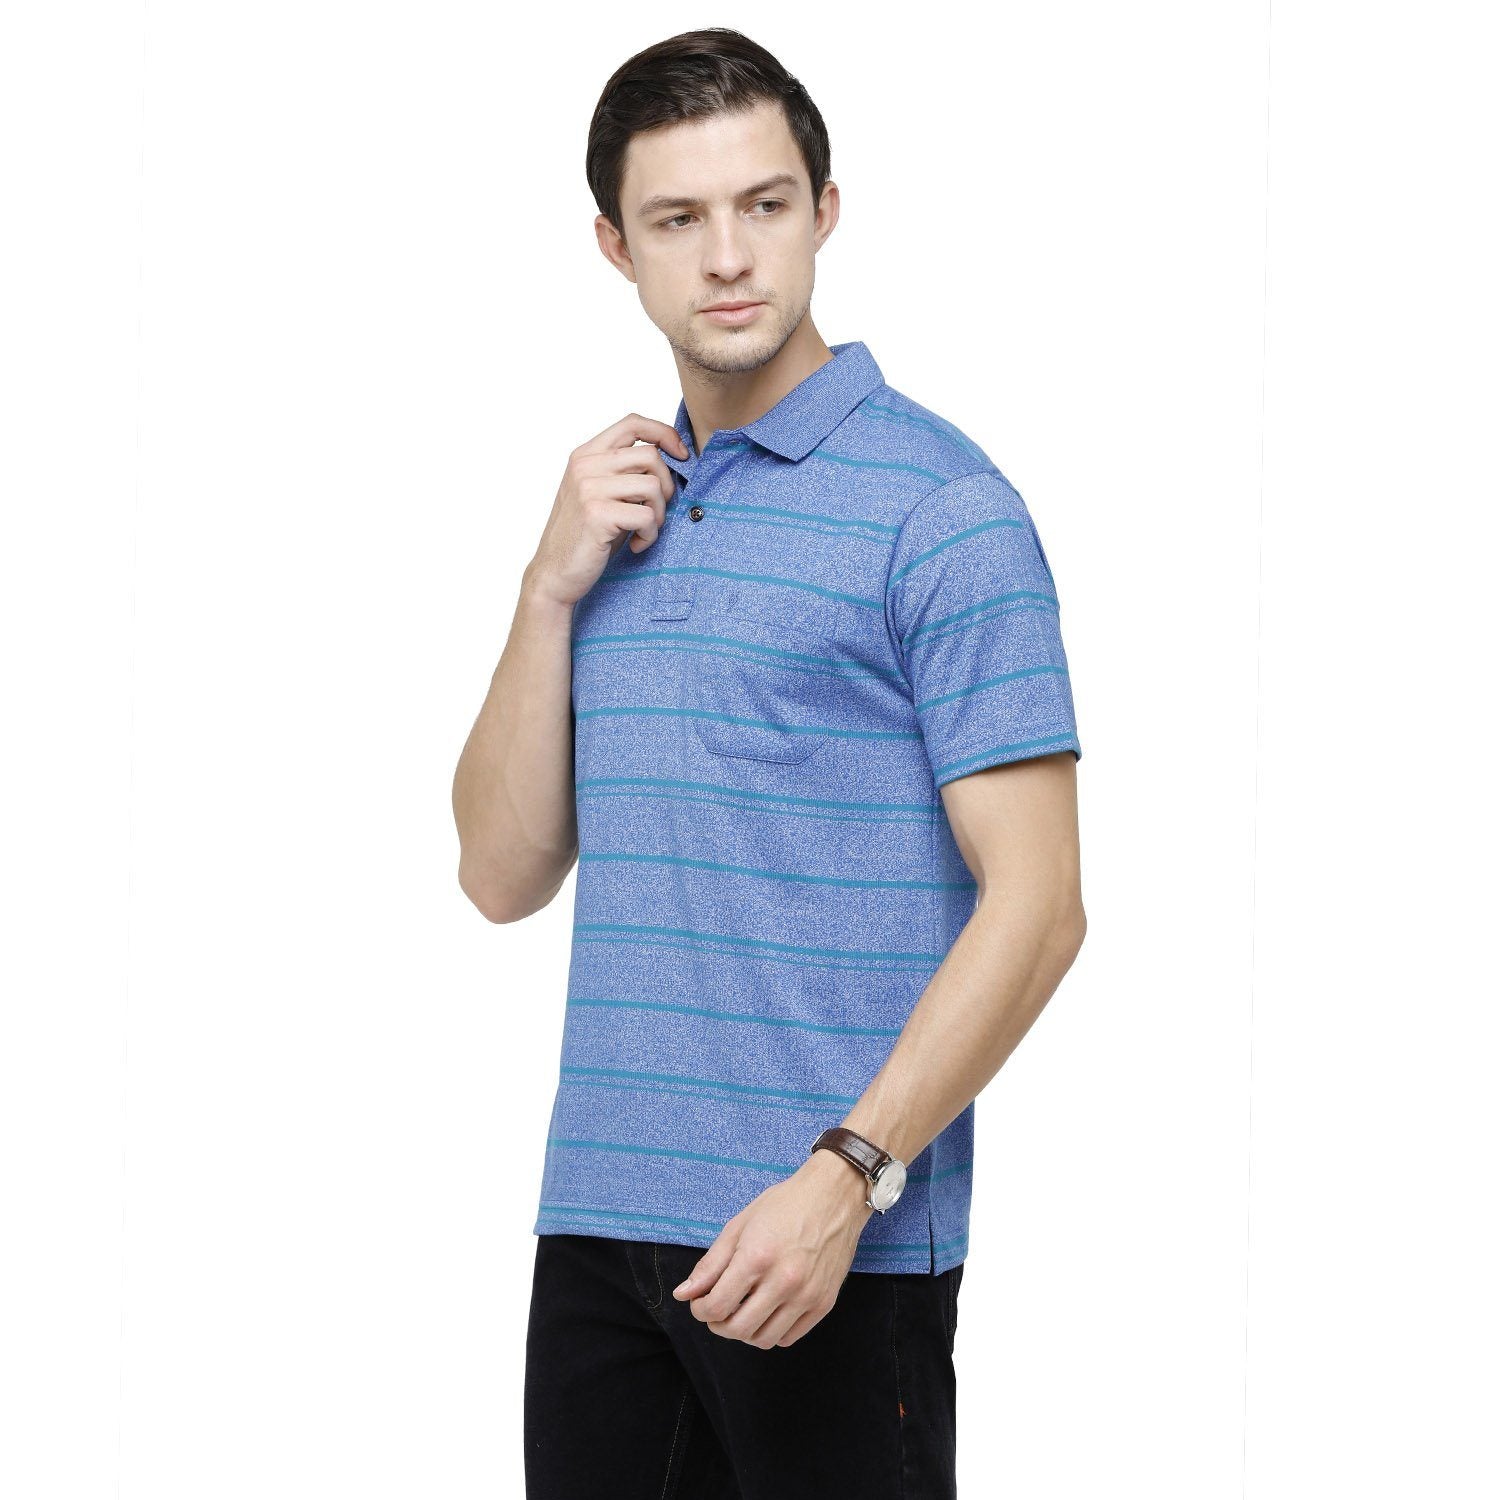 Classic Polo Mens Striped Polo Neck Half Sleeve Regular Fit Cotton Polyester Blend Blue Fashion T-Shirt ( AVON - 469 B AF P ) T-shirt Classic Polo 